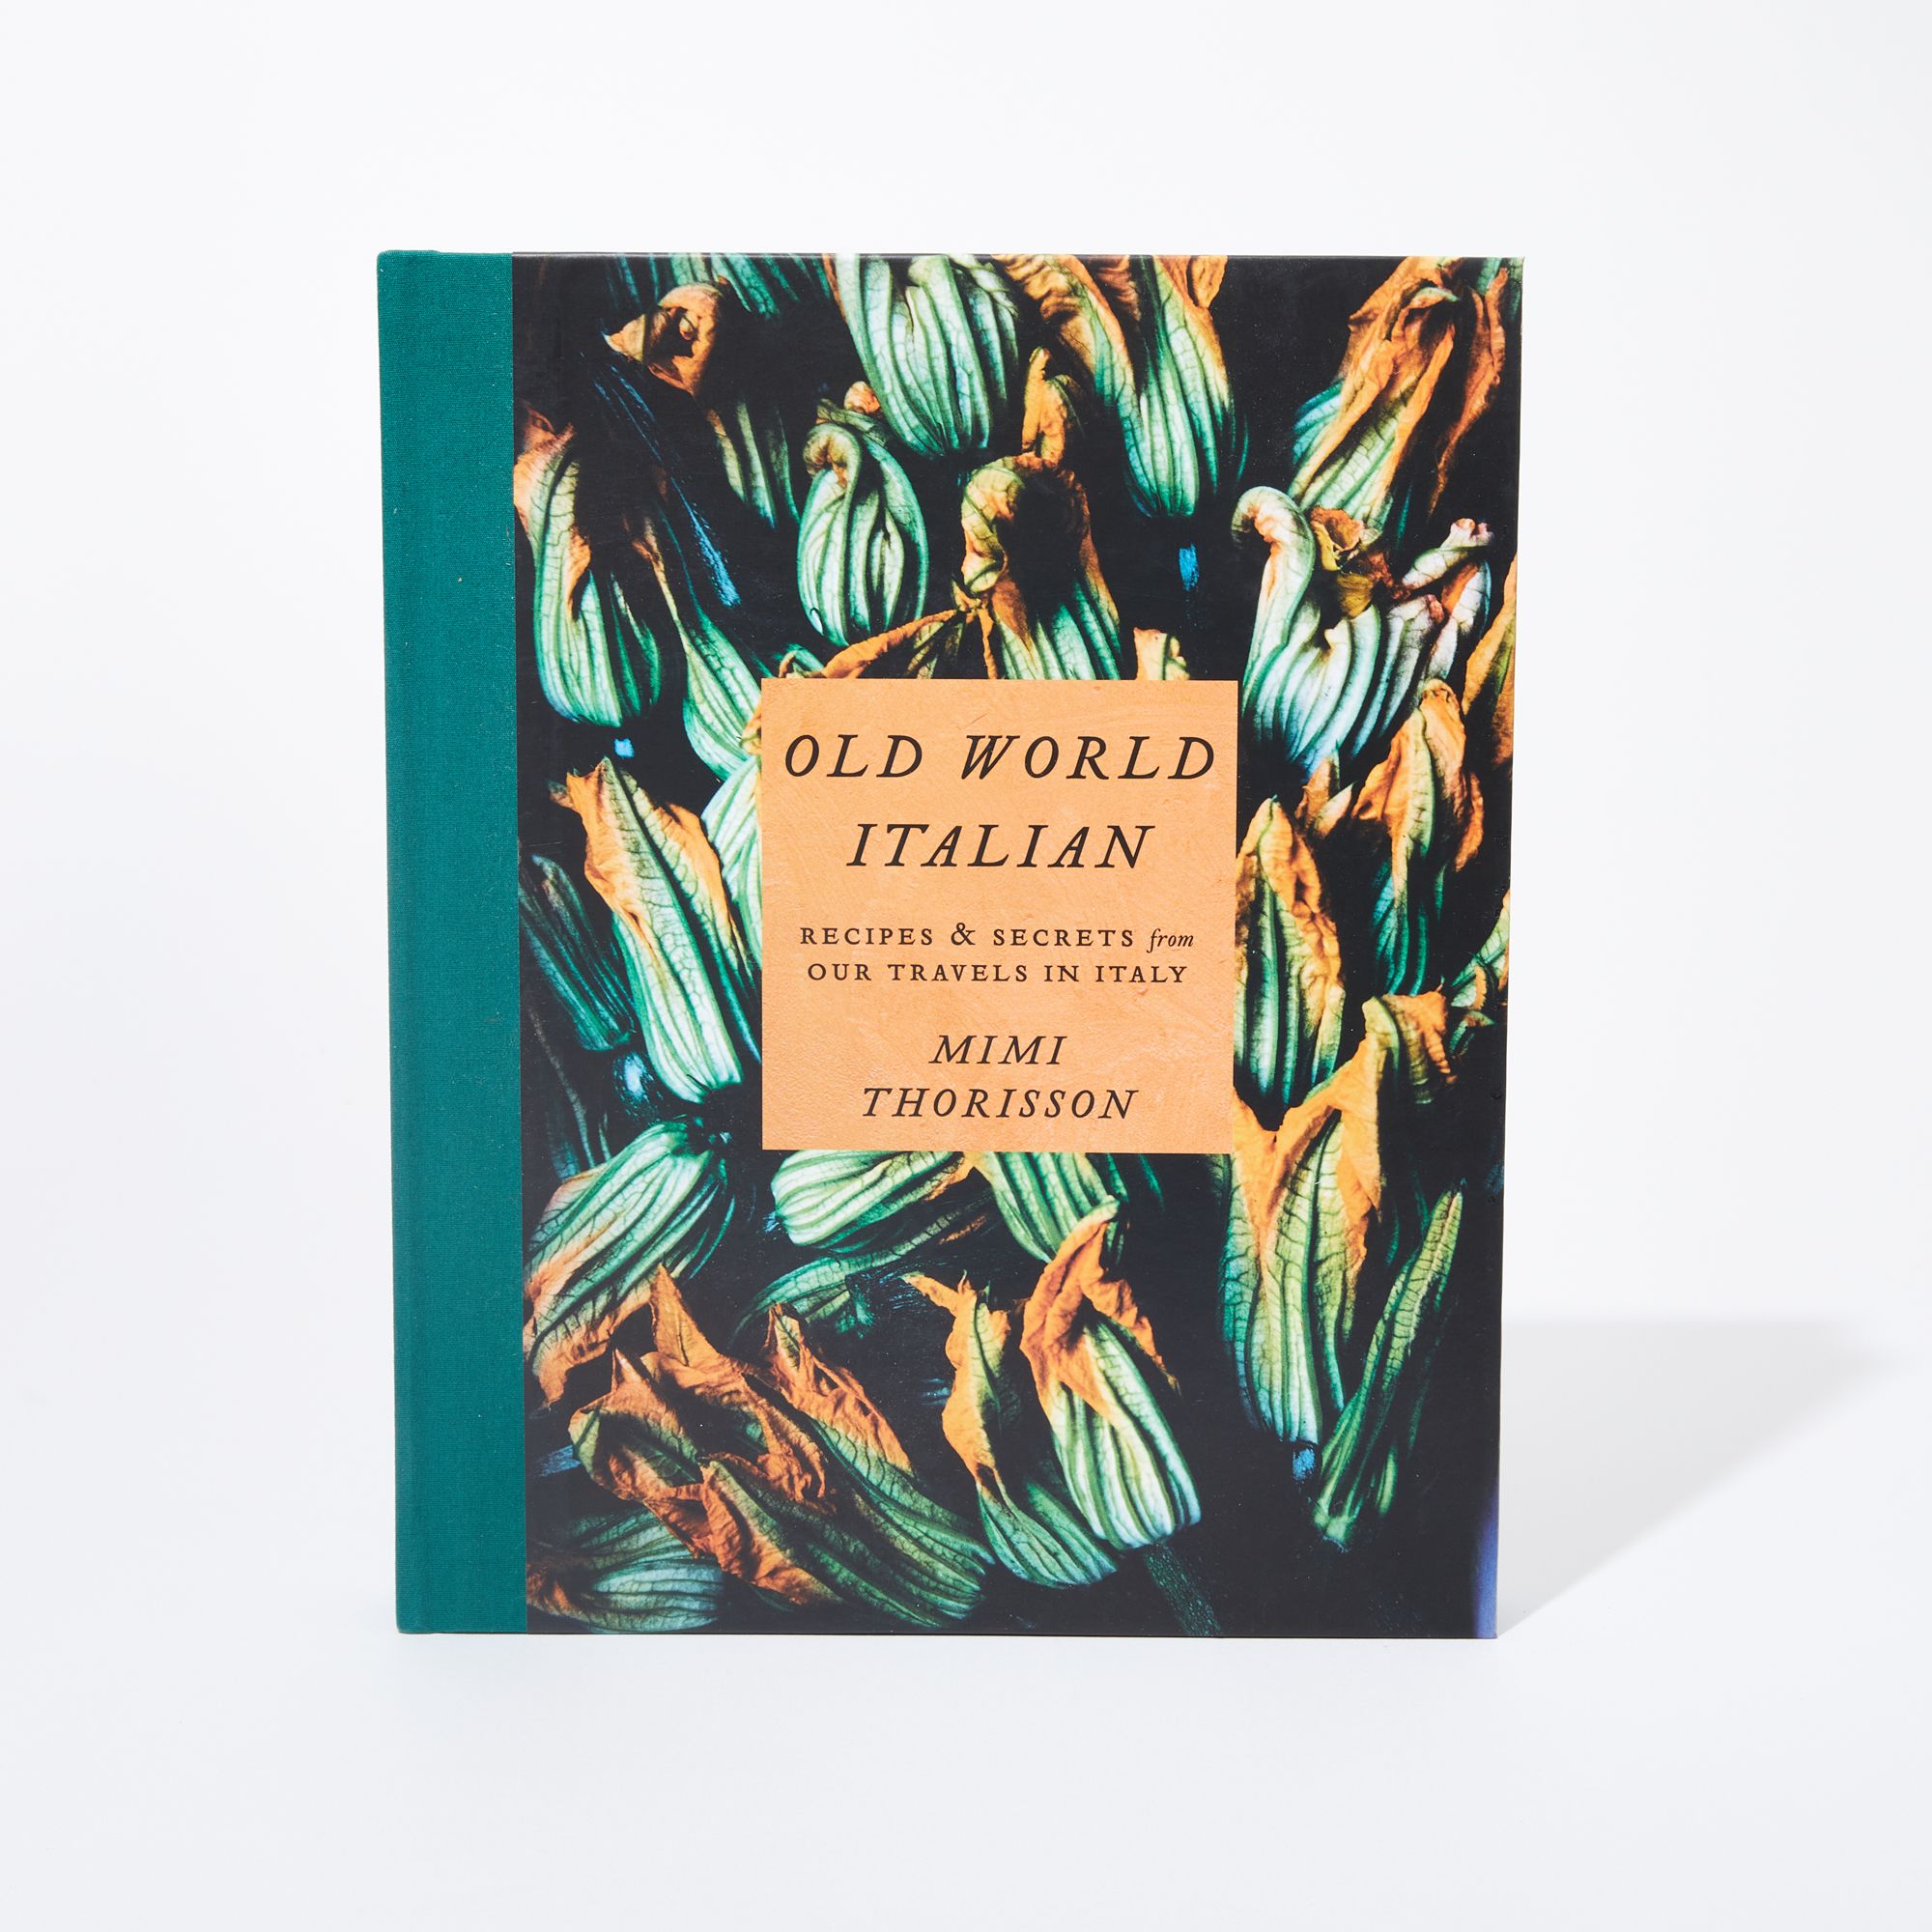 Book Cover - Teal binding, yellow square in center with writing, teal and yellow flower outlines in the background